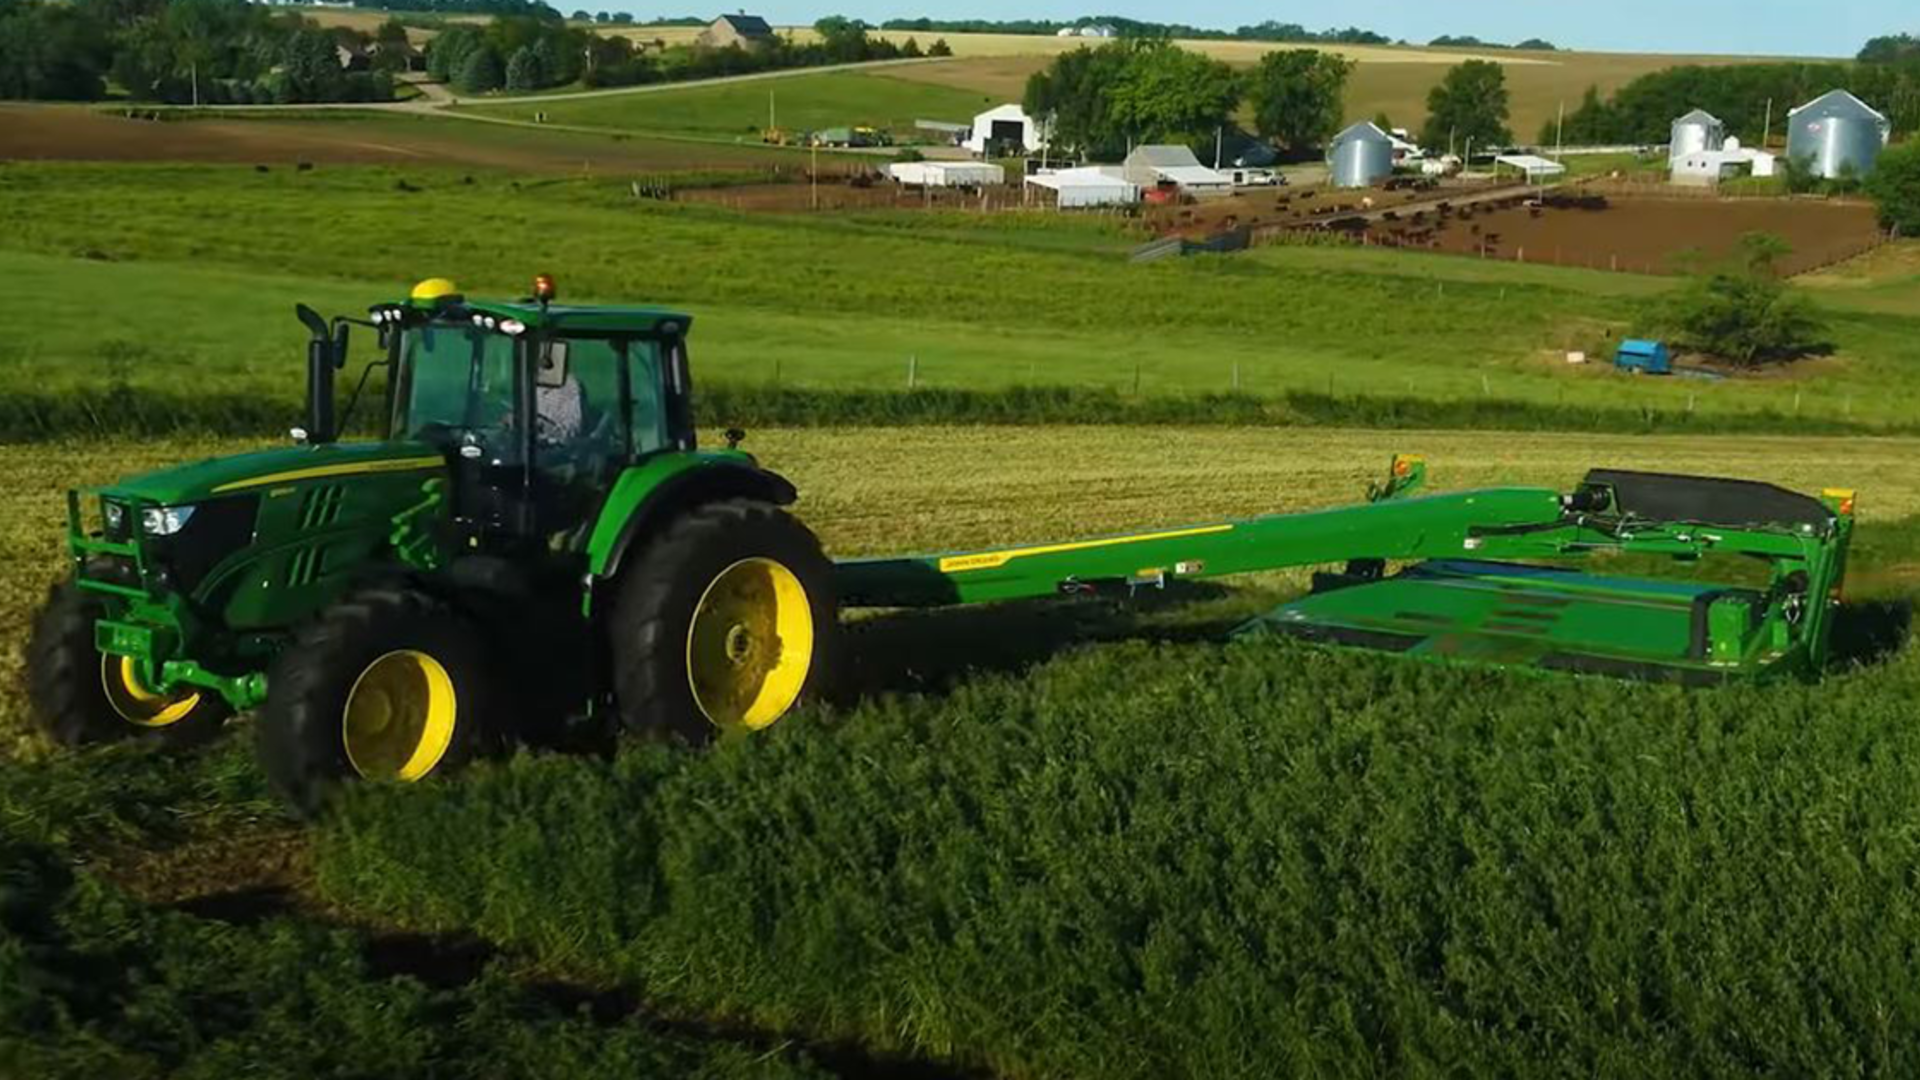 Deere to Move Hay & Forage Manufacturing to Mexico